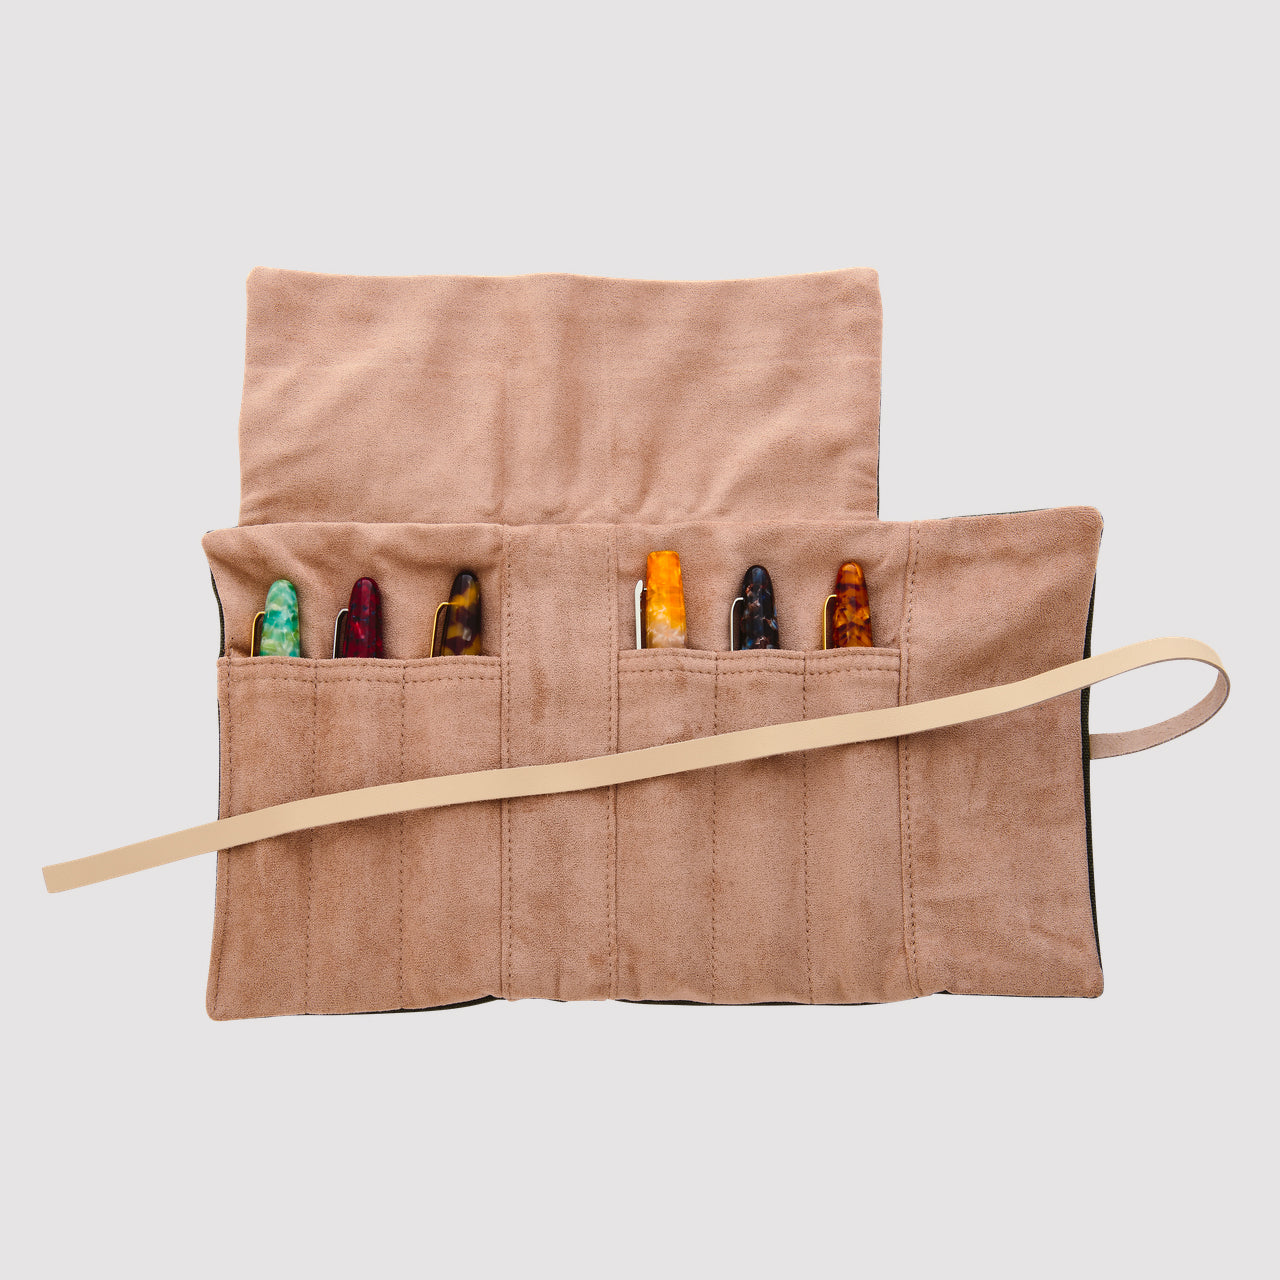 Esterbrook Pen Cups and Rolls - Pen Roll Army Green